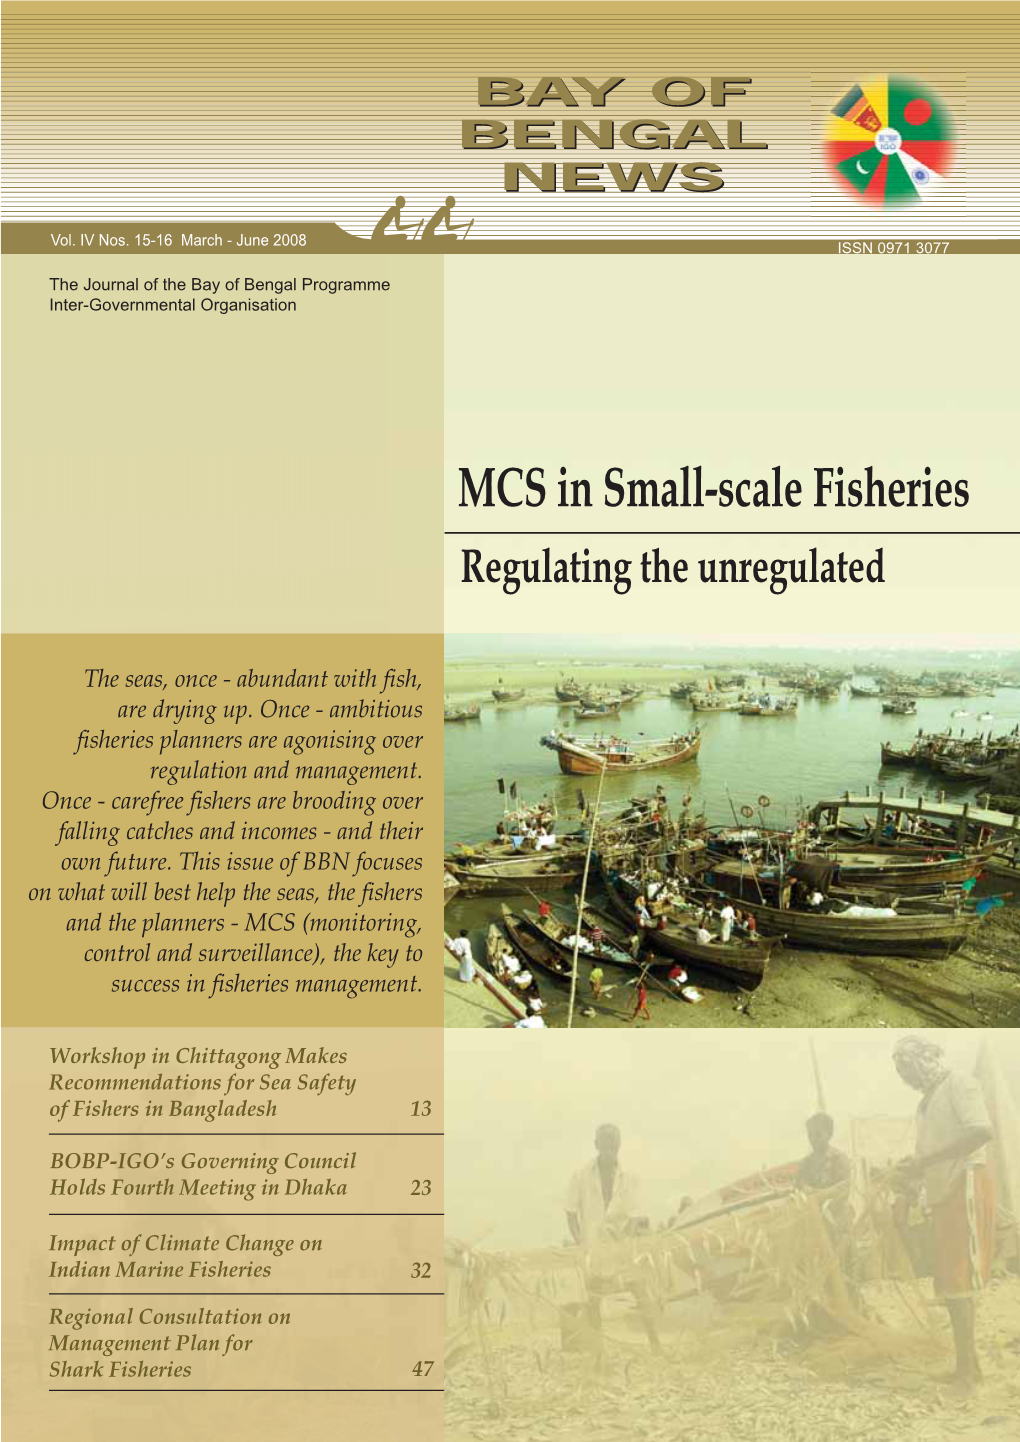 MCS in Small-Scale Fisheries Regulating the Unregulated